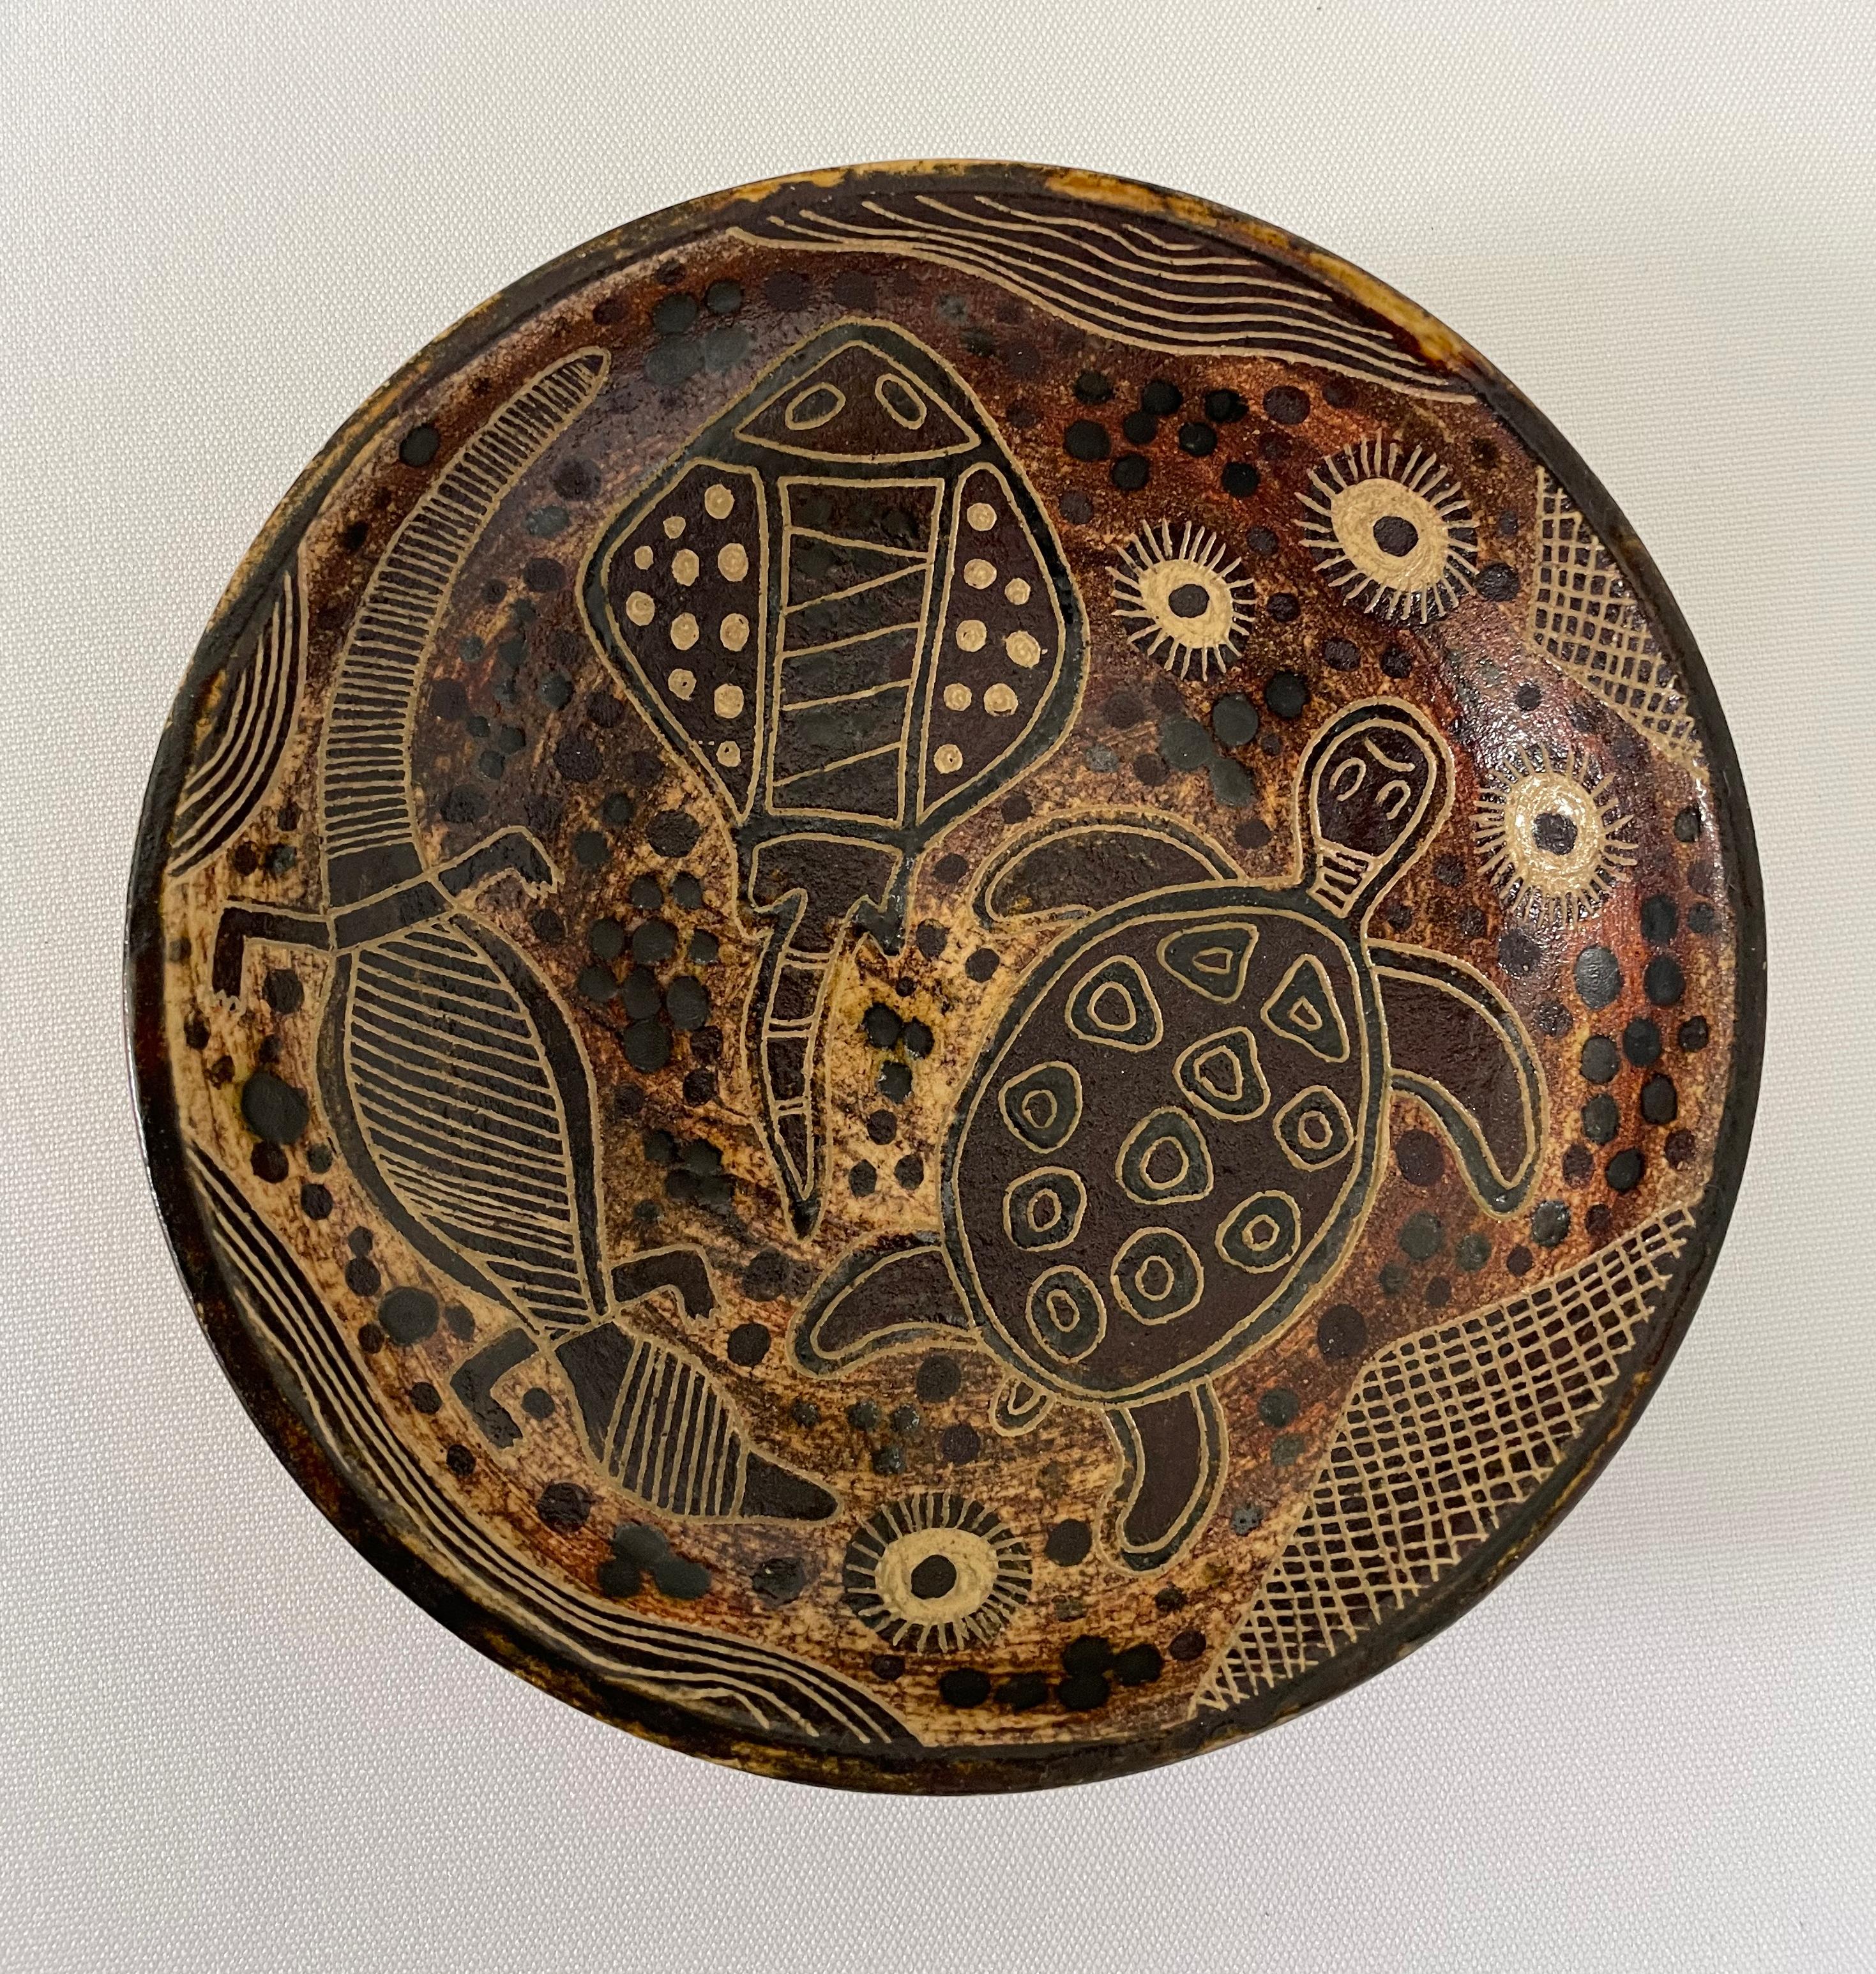 Carl Cooper (1912-1966) was born in Williamstown, Victoria, Australia. 

He was a ceramicist associated with the influential Boyd family and in the mid-1940s he worked with Arthur Merric Boyd and John Perceval at the AMB pottery in Murrumbeena just